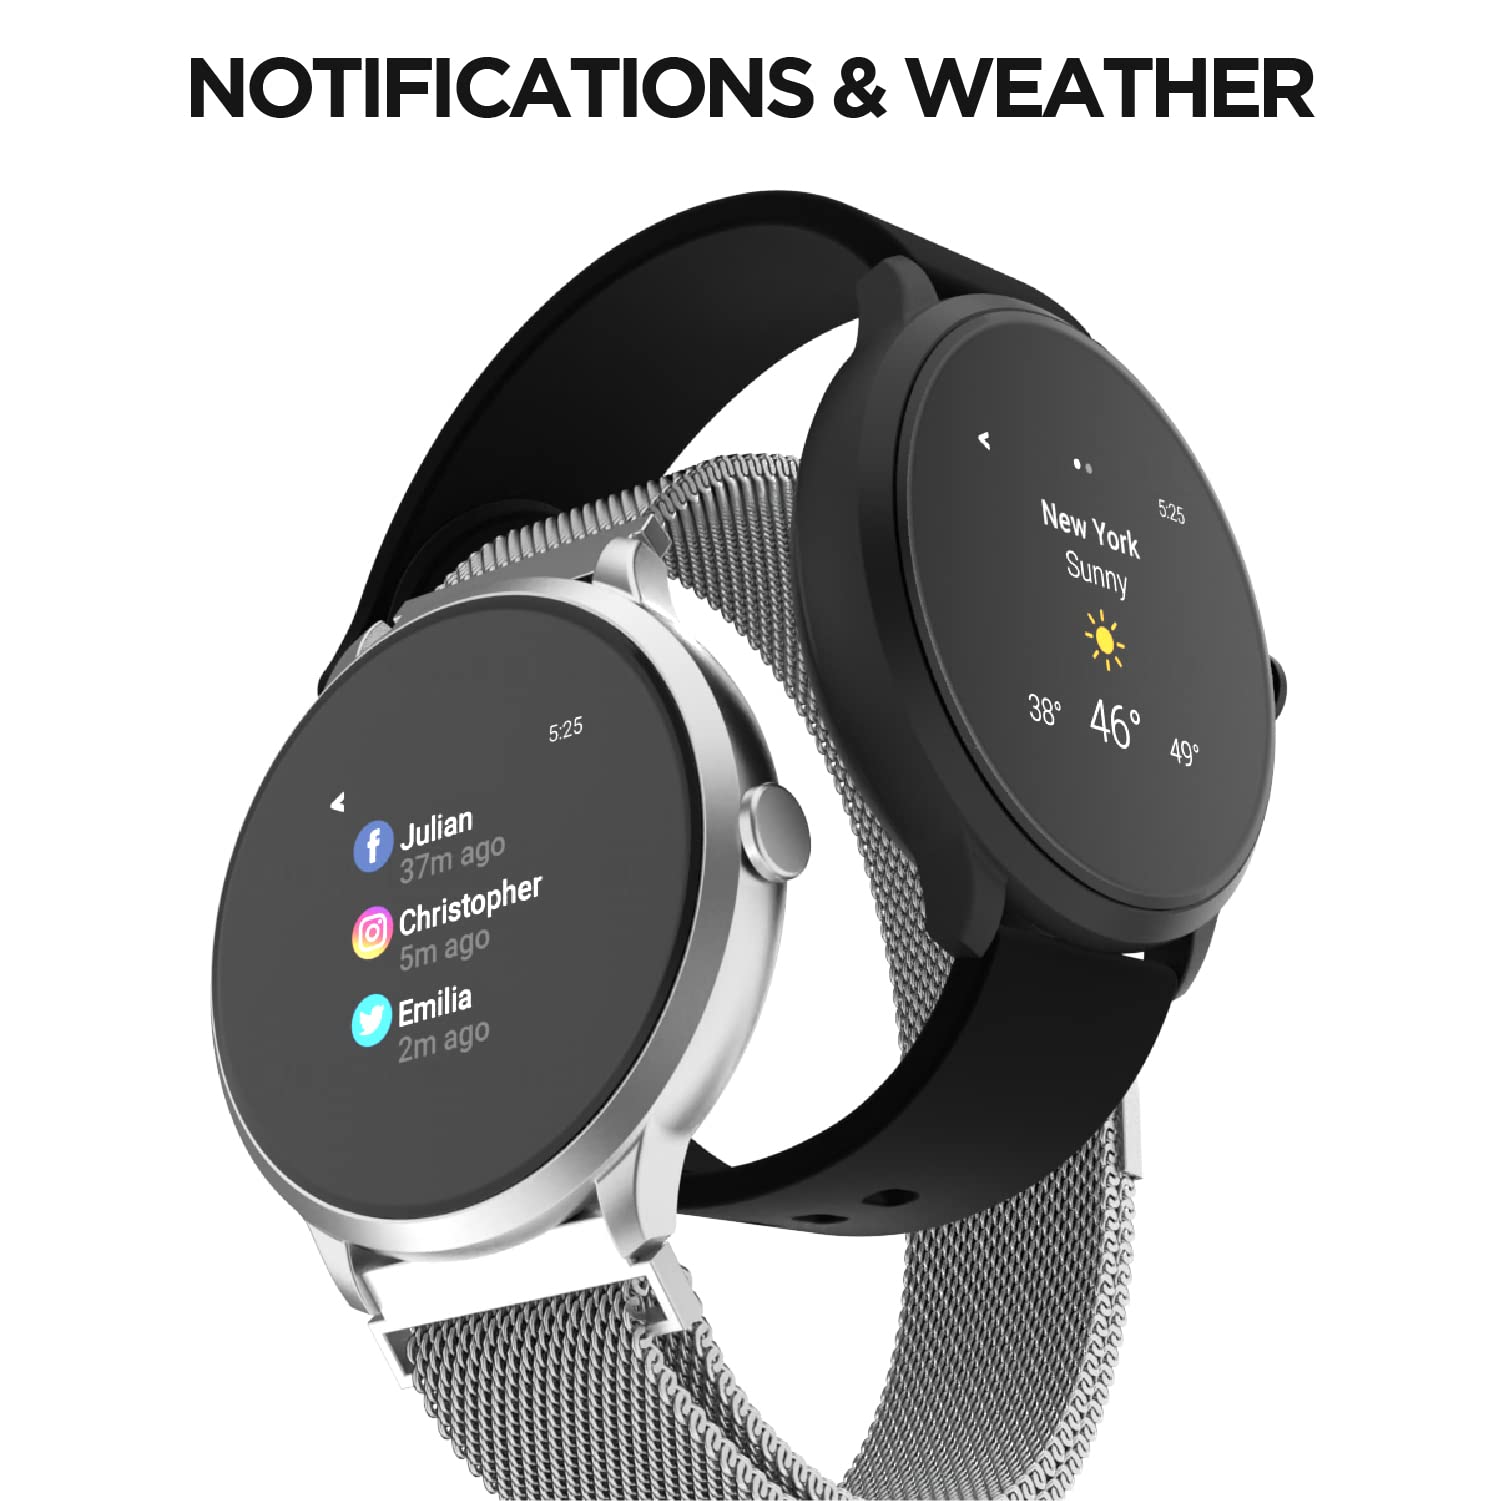 iTouch Sport 3 Smartwatch (with 24/7 Heart Rate Tracking, Step Counter, Notifications, Body Temperature Monitor)